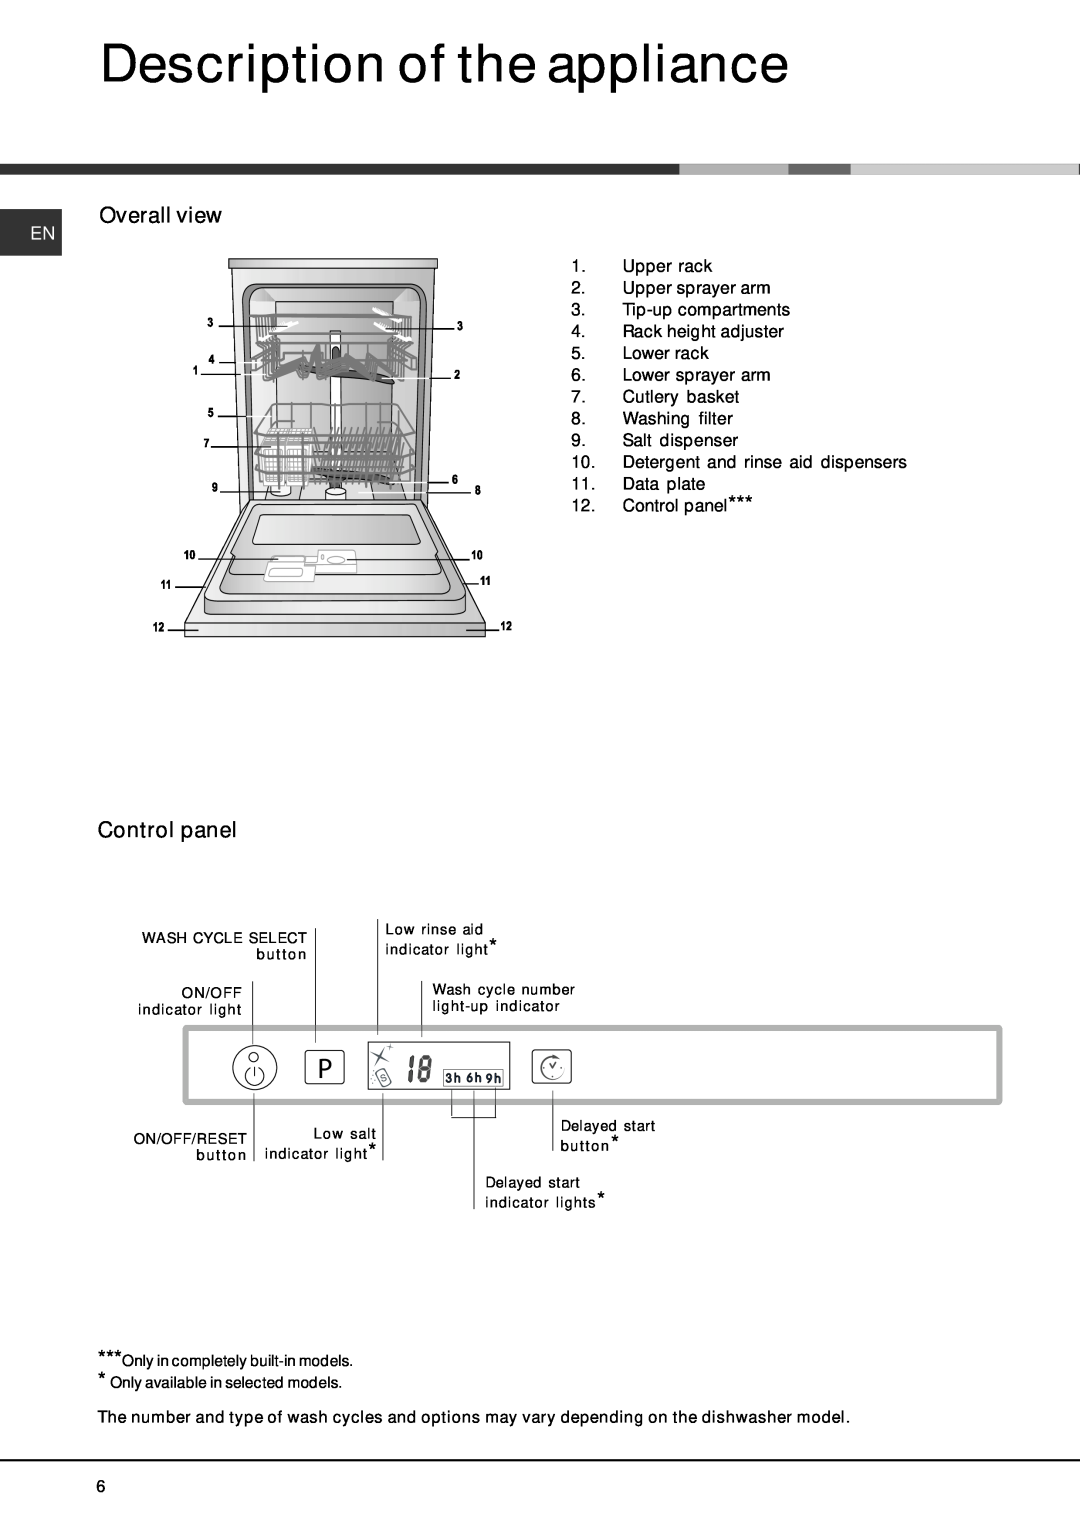 Hotpoint 228 manual Description of the appliance, Overall view, Control panel 